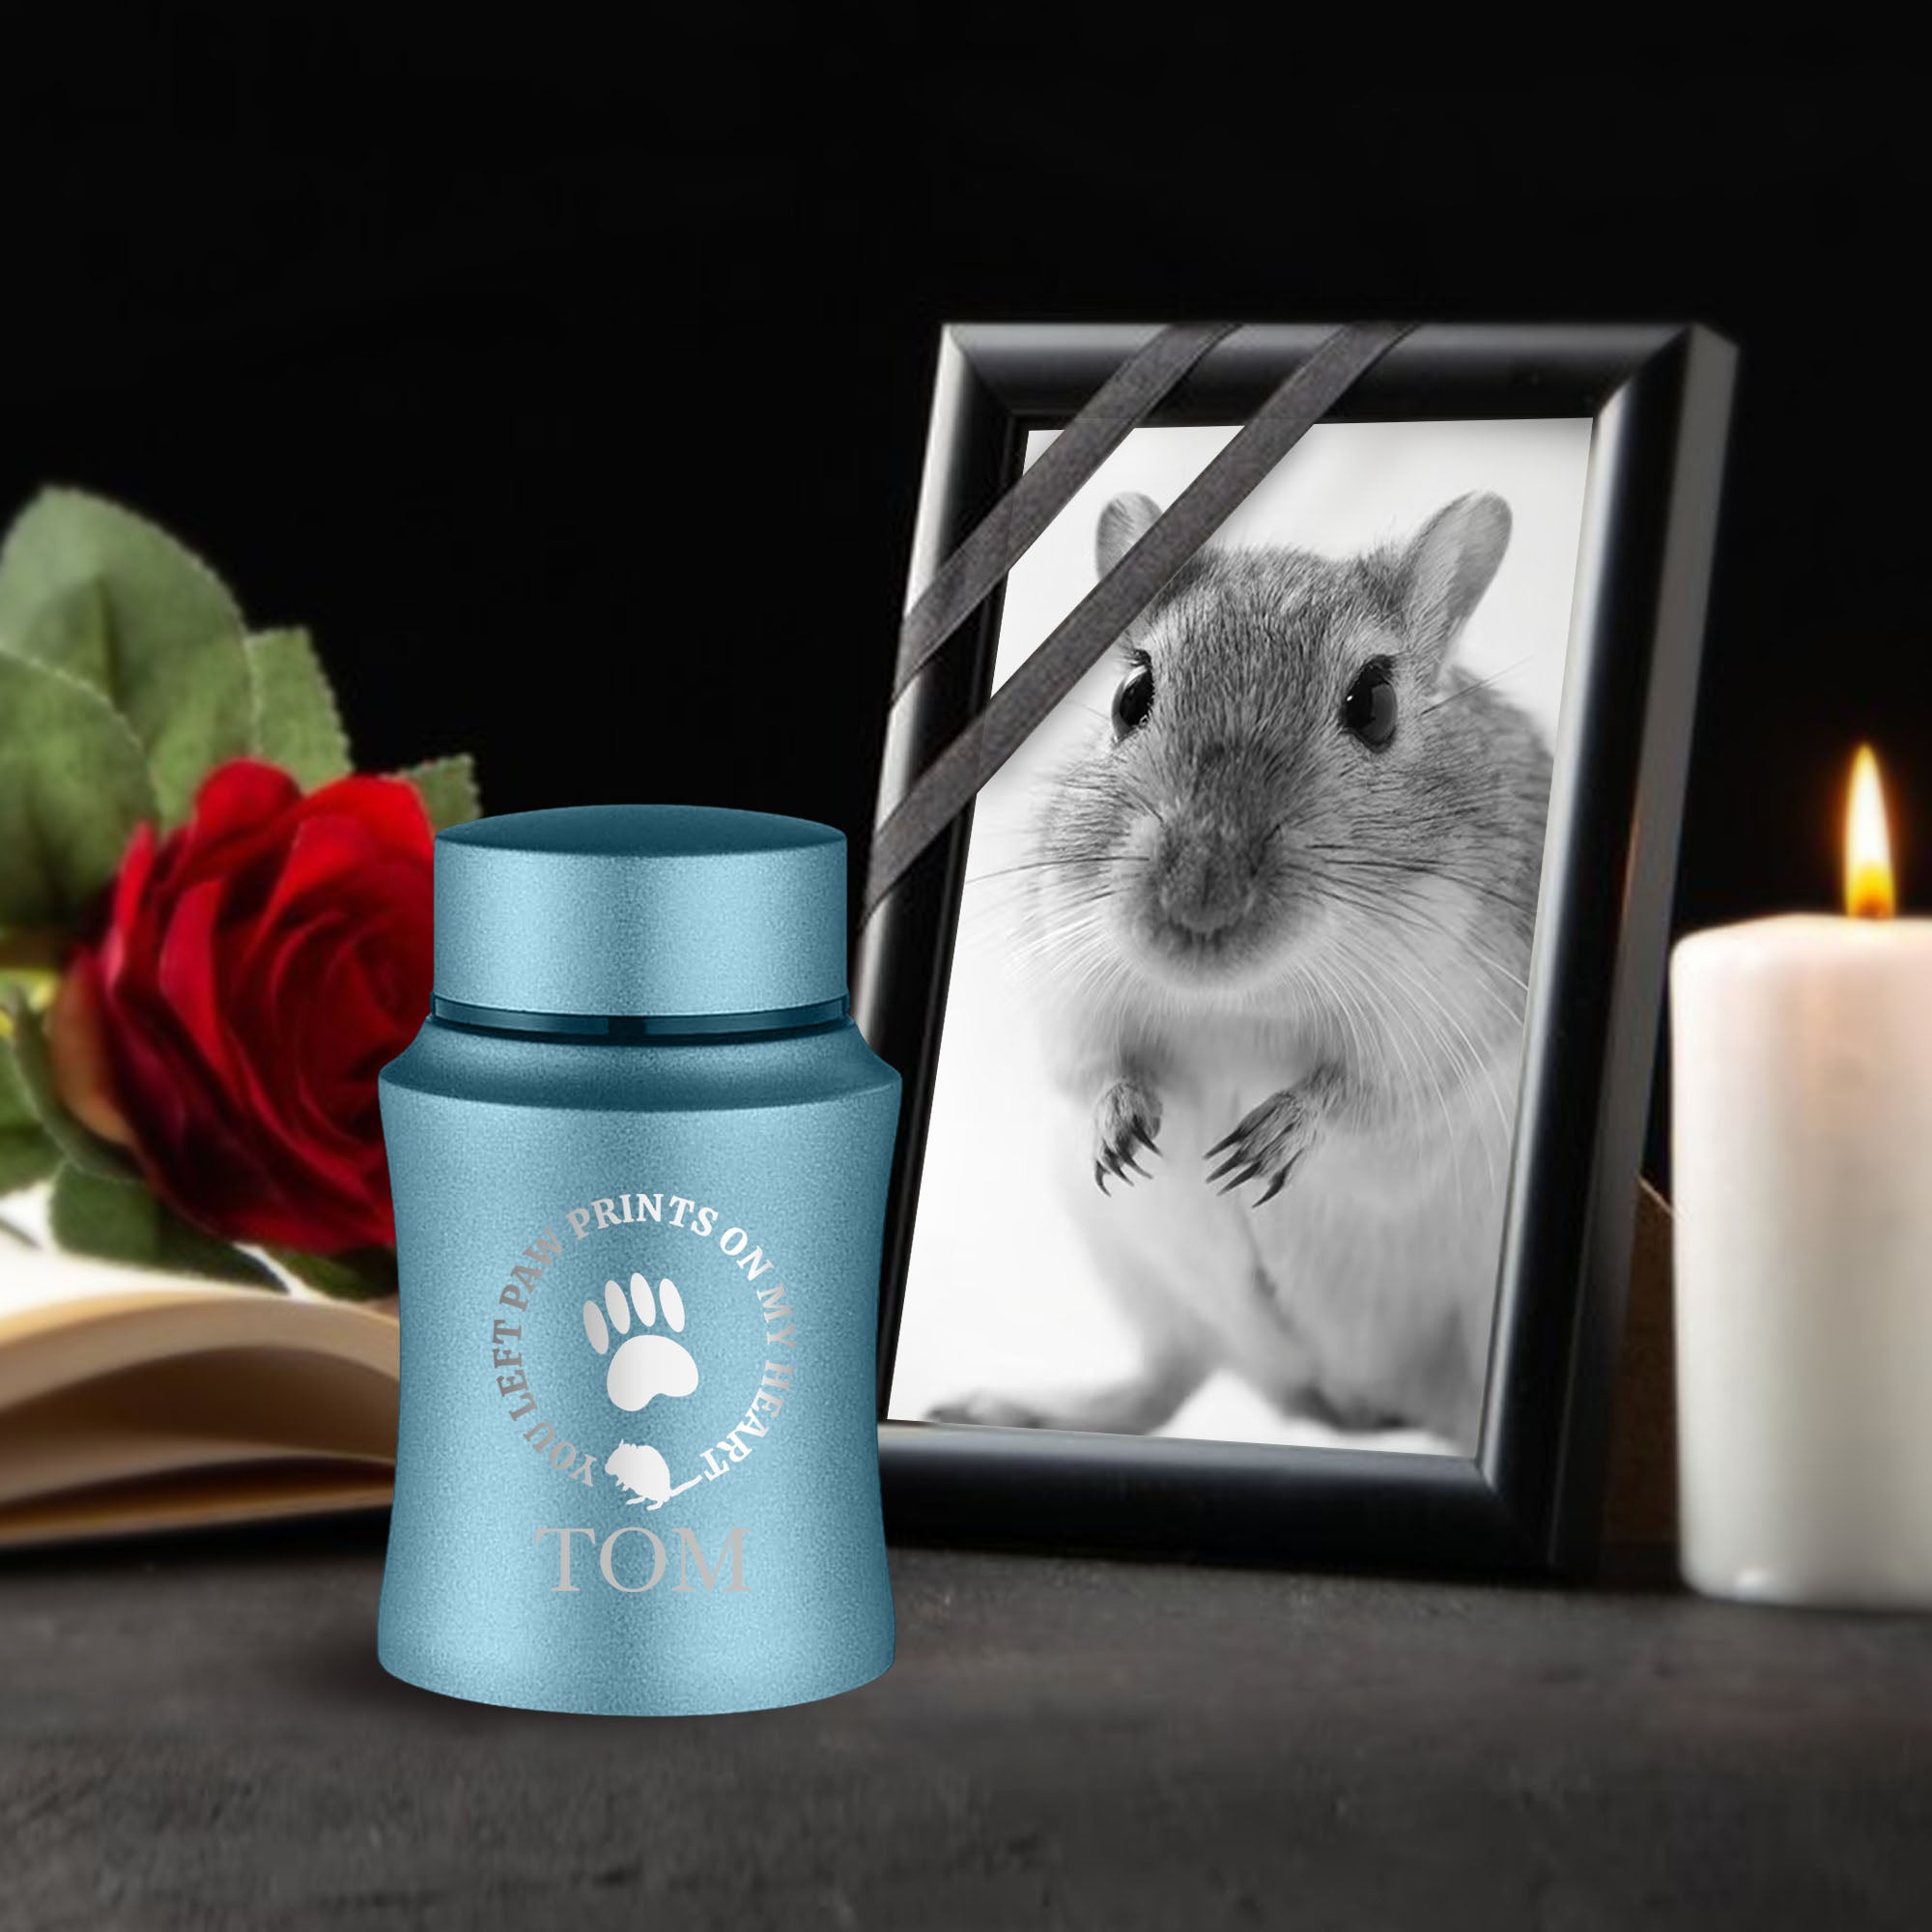 Customized Small Keepsake Urn Personalized Engraved with Pet Name, Date, and Text - 4" Powder Coated Cremation Mini Compact Urn for Gerbil Ashes | 5–10 Lbs Capacity.